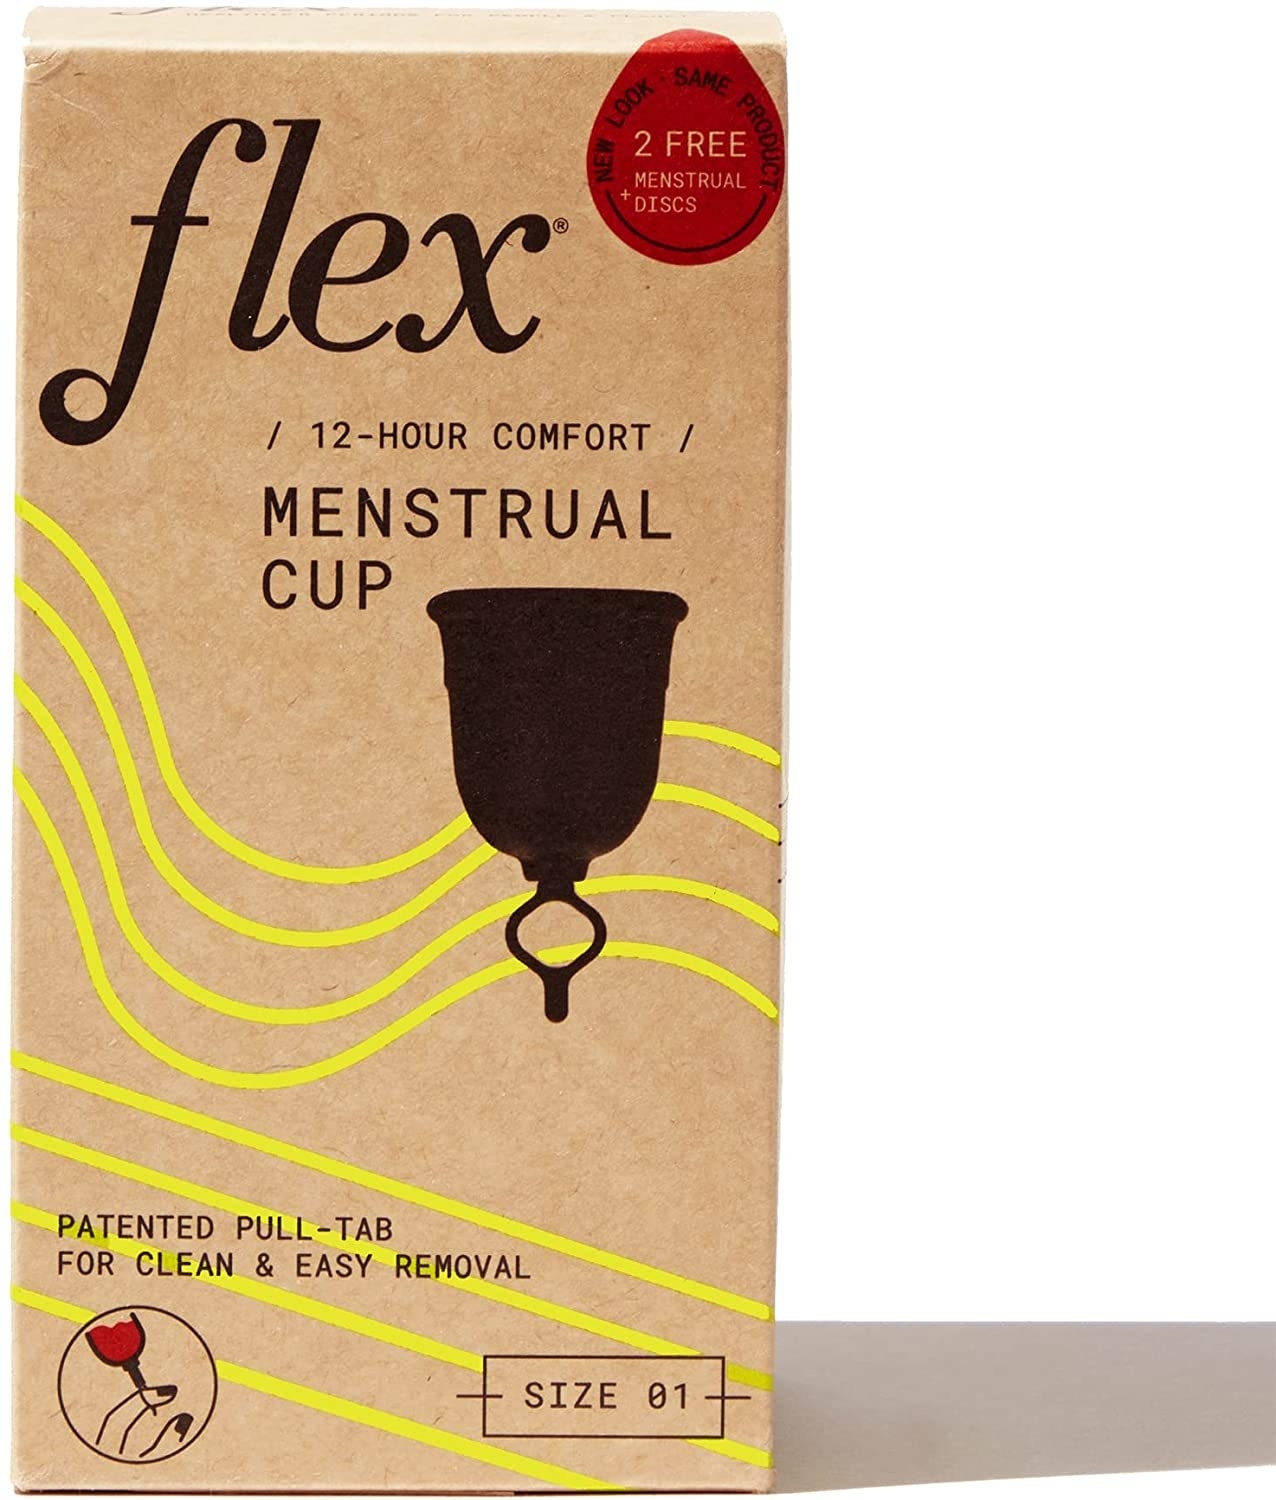 Flex Cup Starter Kit (Full Fit - Size 02), Reusable Menstrual Cup + 2 Free  Menstrual Discs, Pull-Tab for Easy Removal, Tampon + Pad Alternative